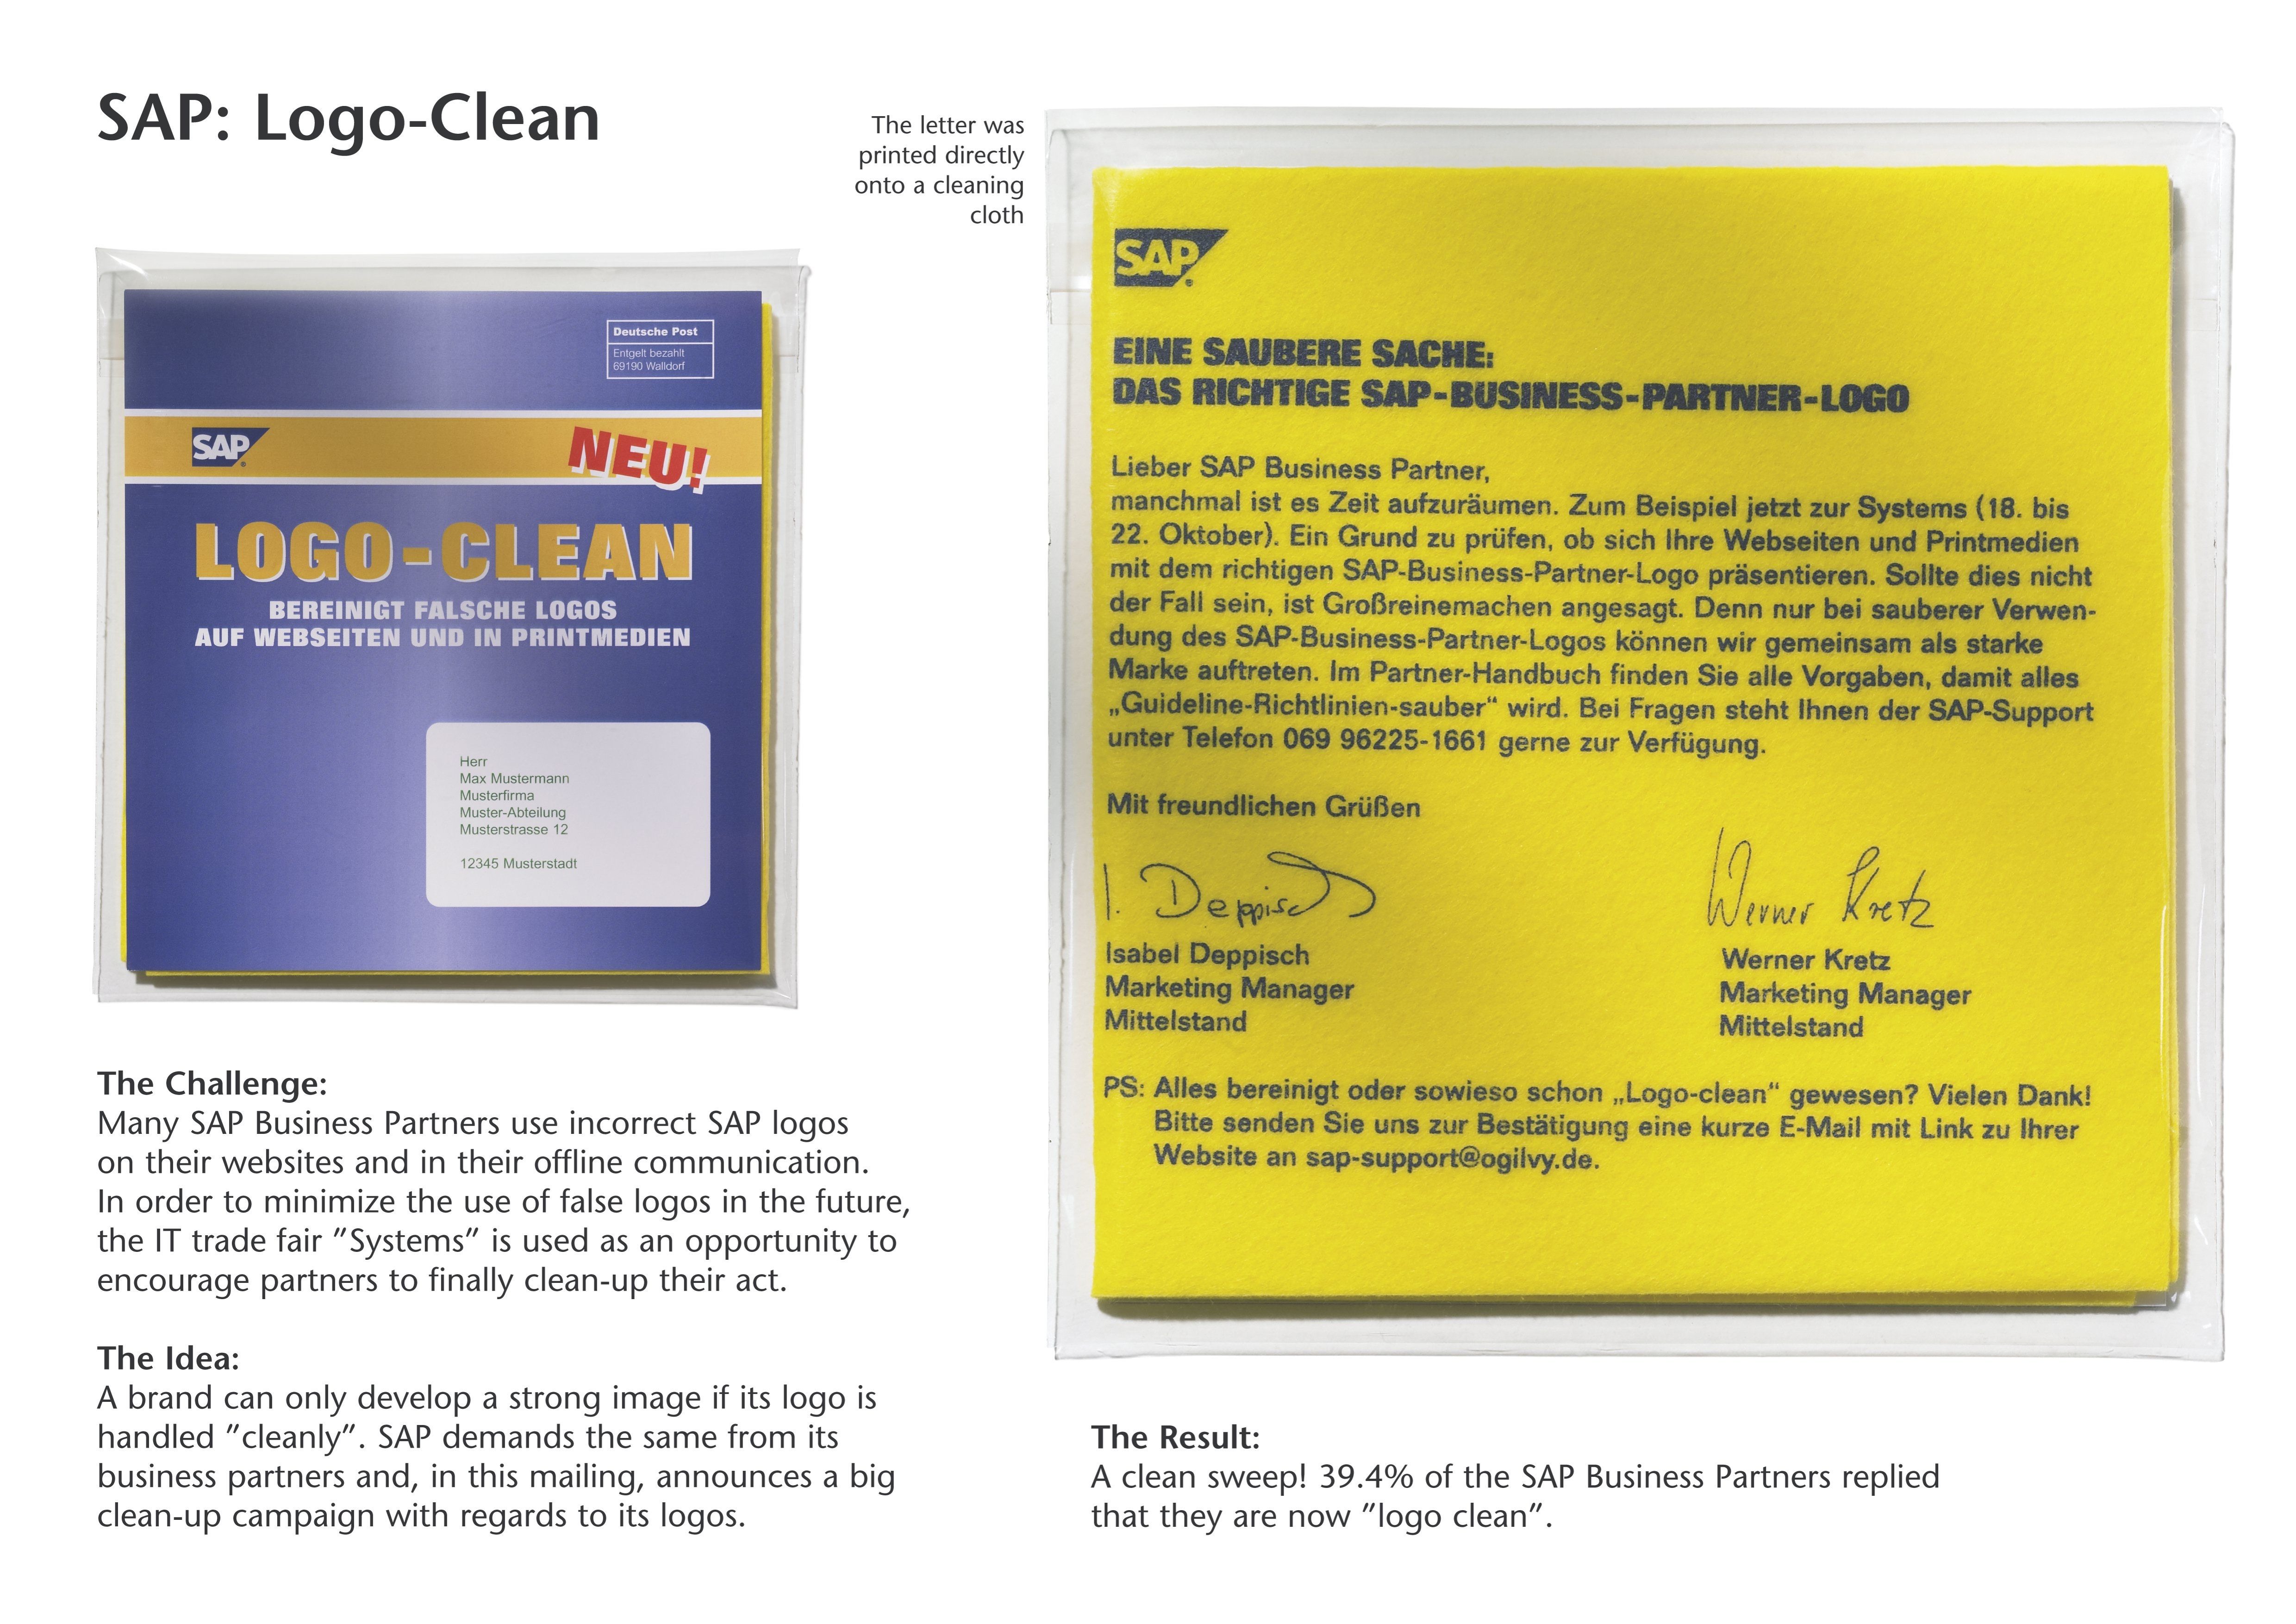 LOGO CLEAN-UP CAMPAIGN